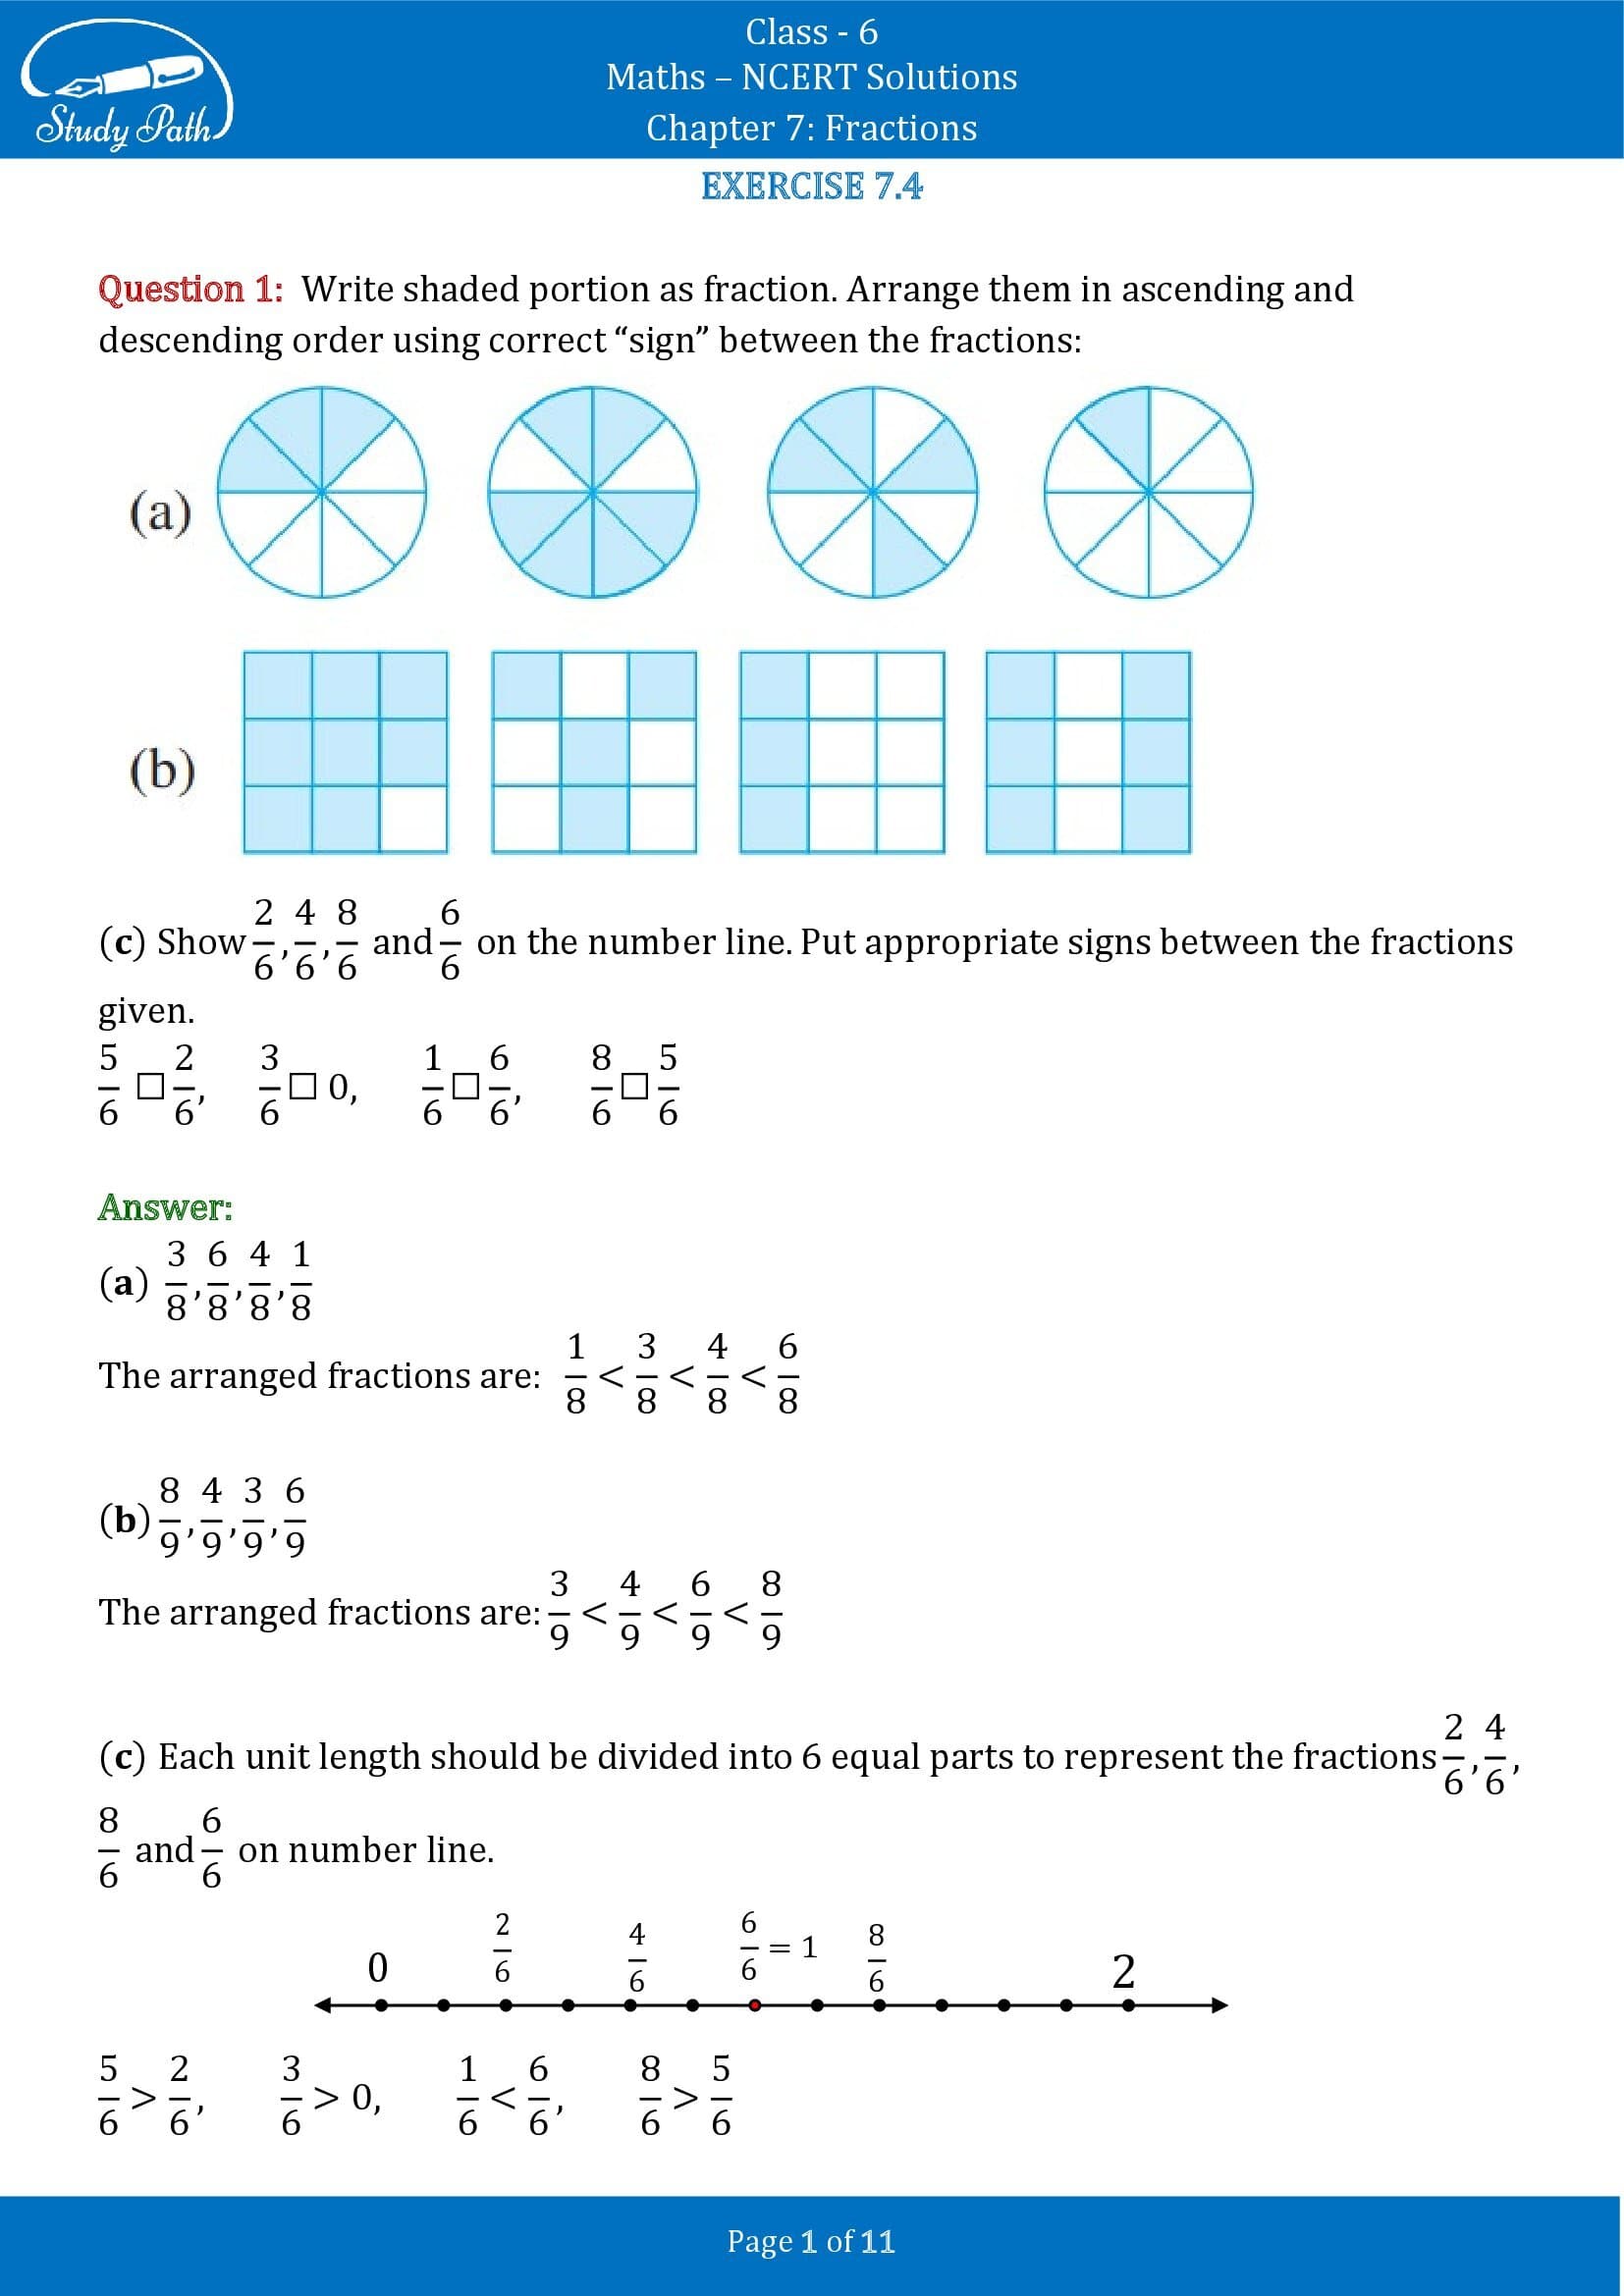 NCERT Solutions for Class 6 Maths Chapter 7 Fractions Exercise 7.4 00001